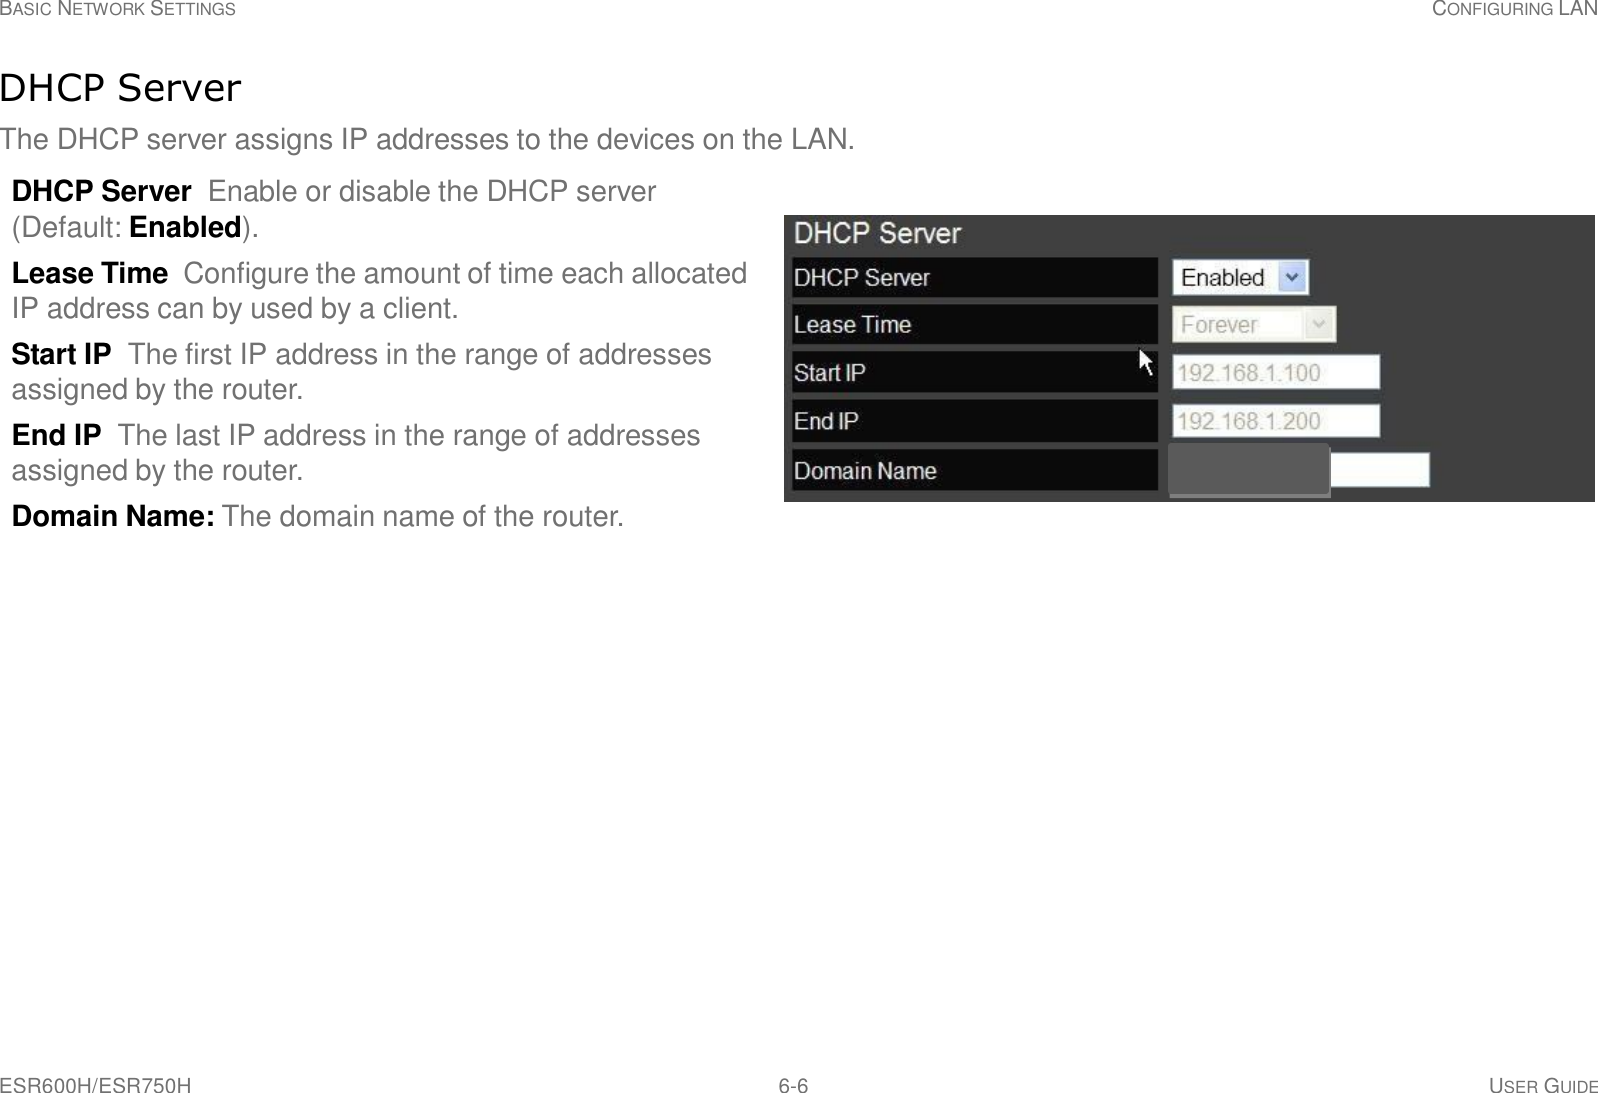 ESR600H/ESR750H 6-6 USER GUIDE BASIC NETWORK SETTINGS CONFIGURING LAN     DHCP Server  The DHCP server assigns IP addresses to the devices on the LAN.  DHCP Server Enable or disable the DHCP server (Default: Enabled).  Lease Time  Configure the amount of time each allocated IP address can by used by a client.  Start IP  The first IP address in the range of addresses assigned by the router.  End IP  The last IP address in the range of addresses assigned by the router.  Domain Name: The domain name of the router. 